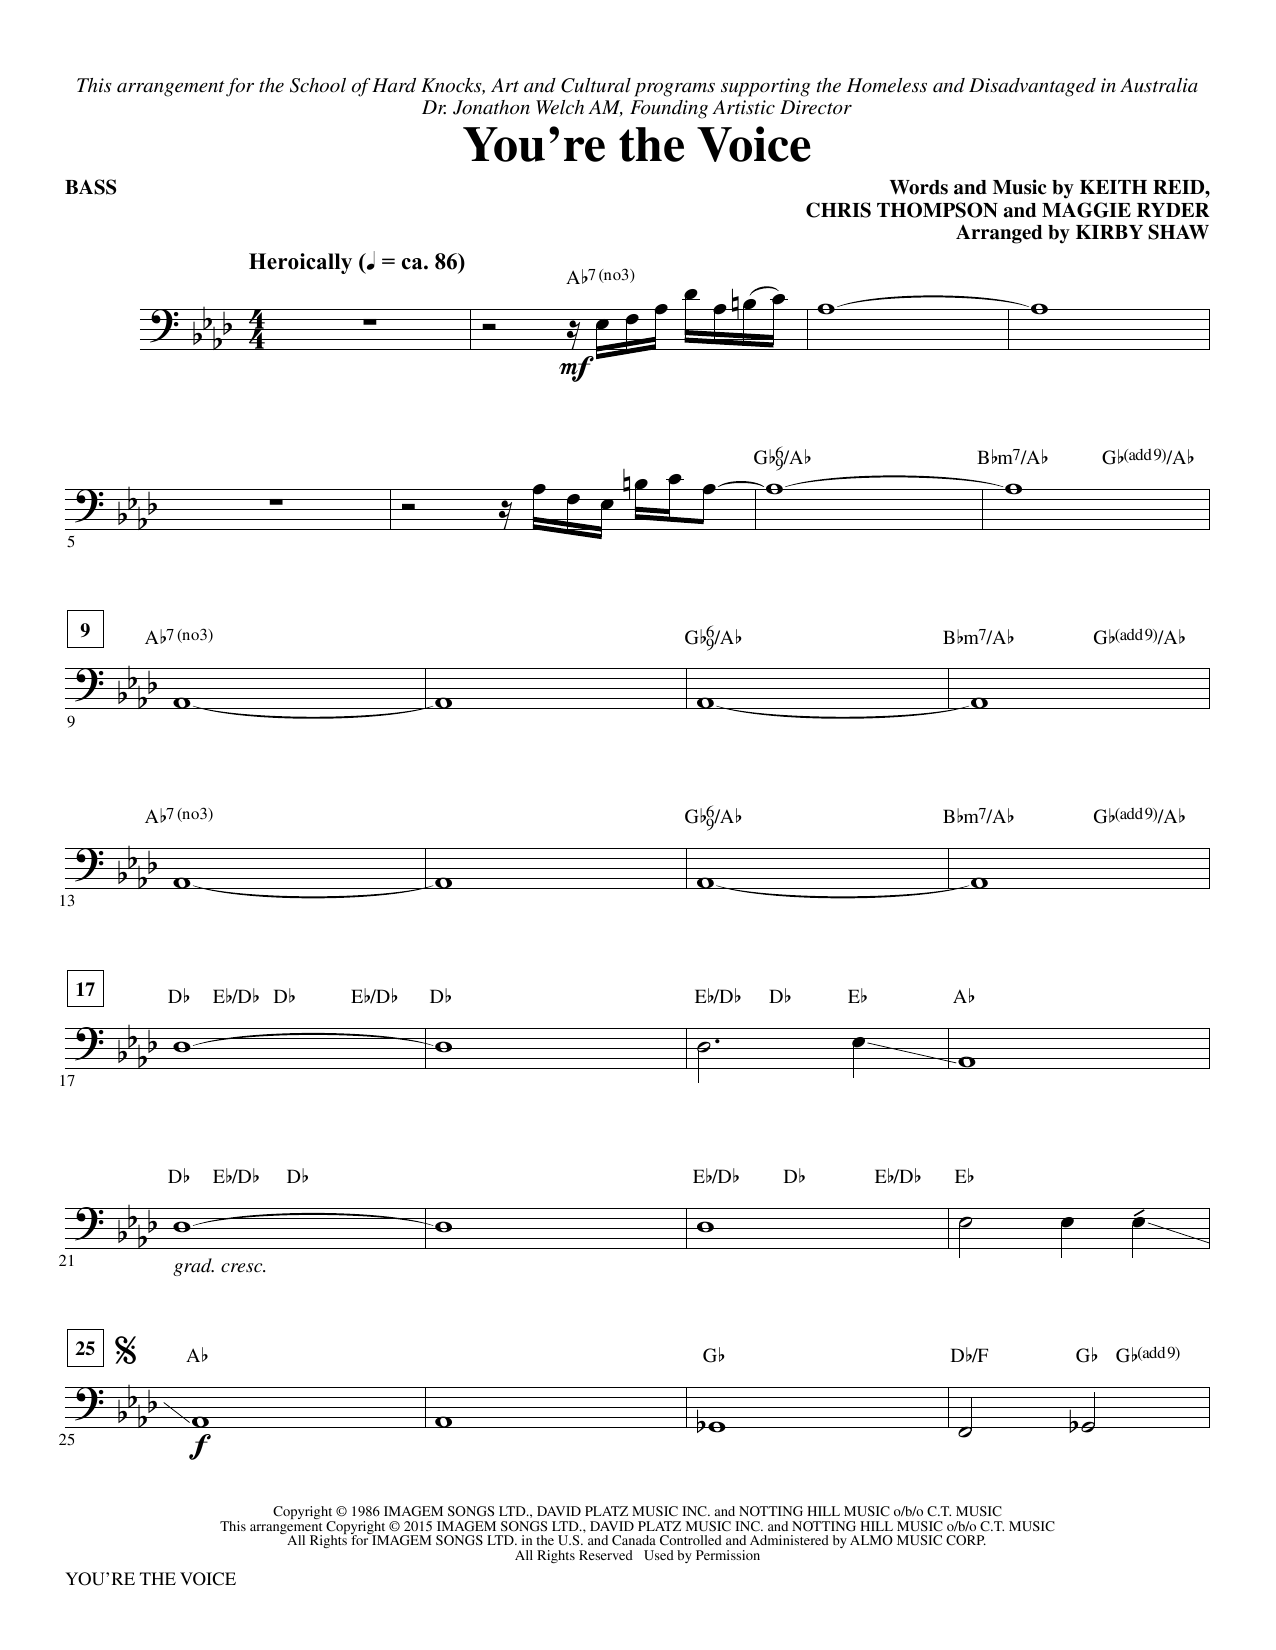 John Farnham You're the Voice (arr. Kirby Shaw) - Bass sheet music notes and chords. Download Printable PDF.